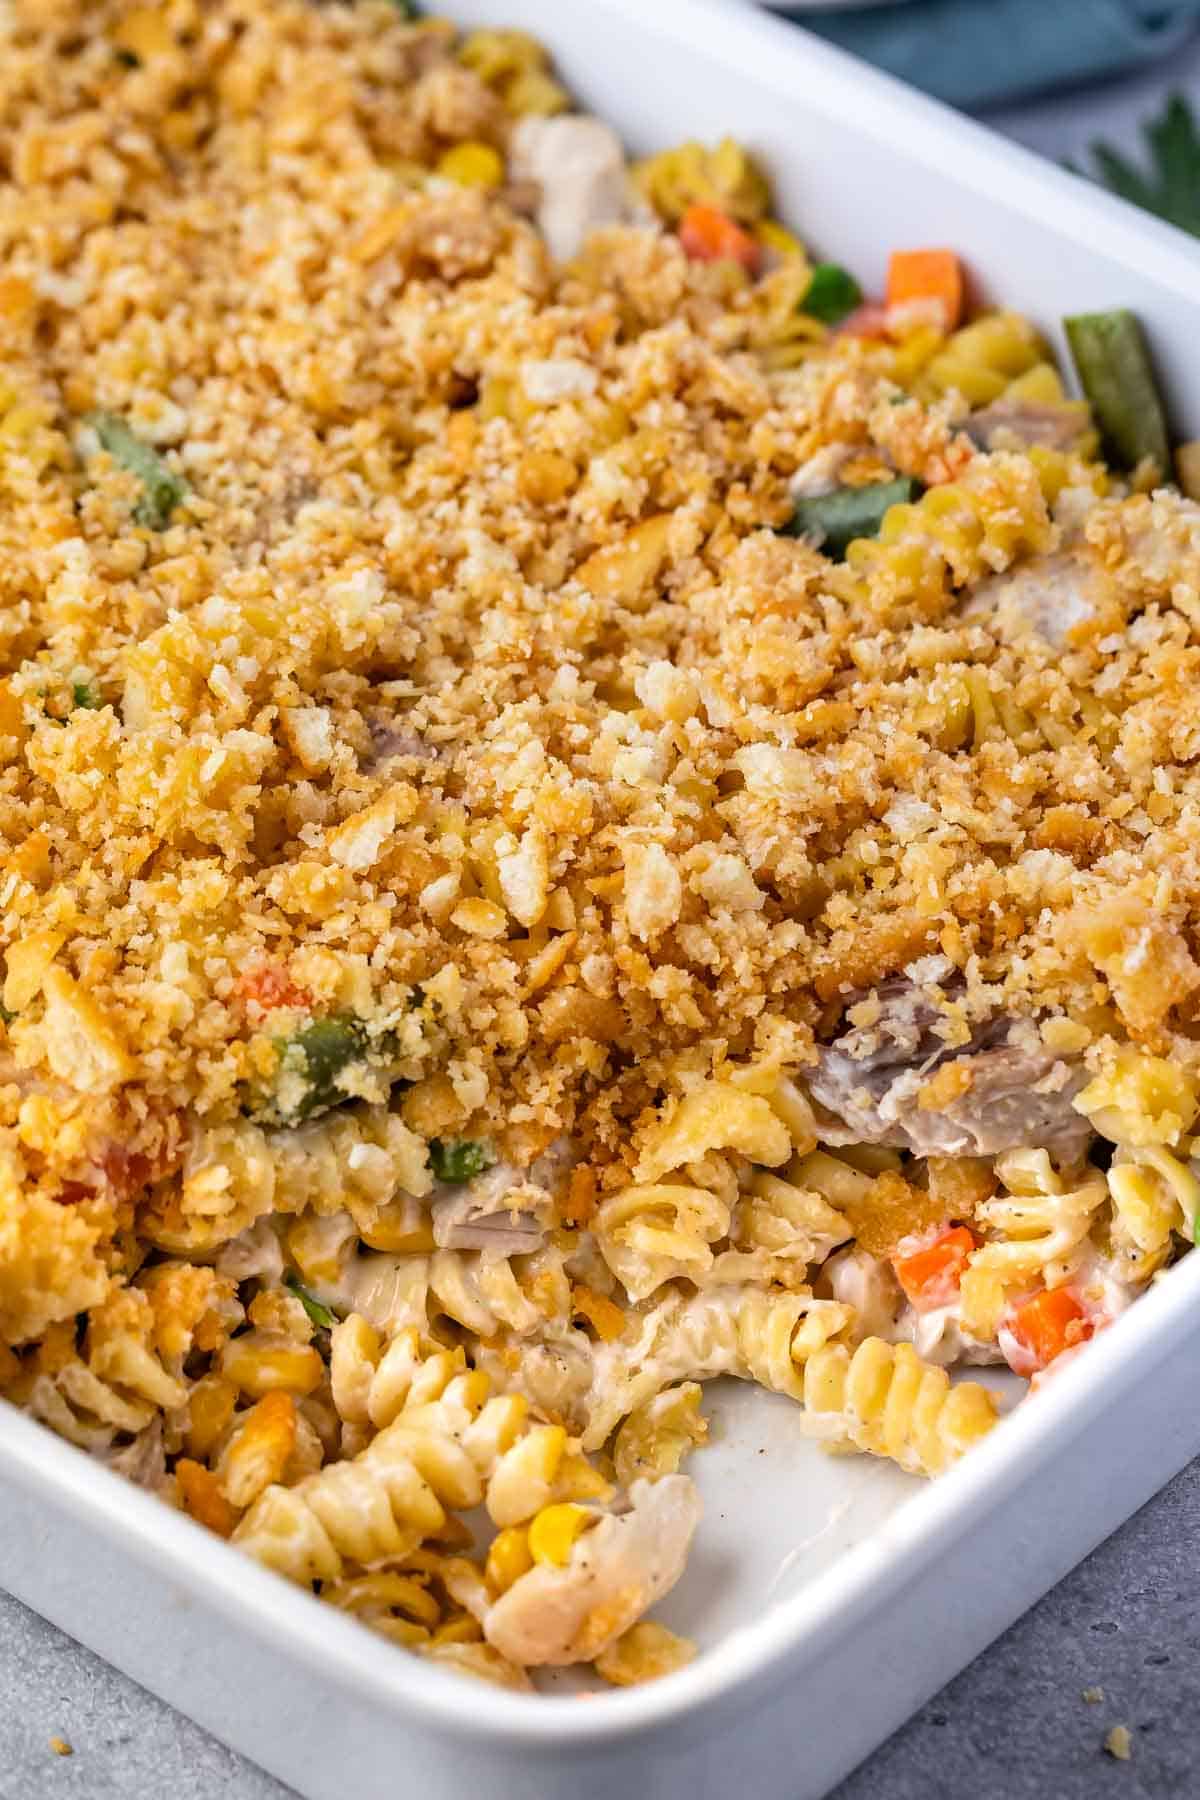 pasta and breadcrumbs and vegetables mixed together in a white pan